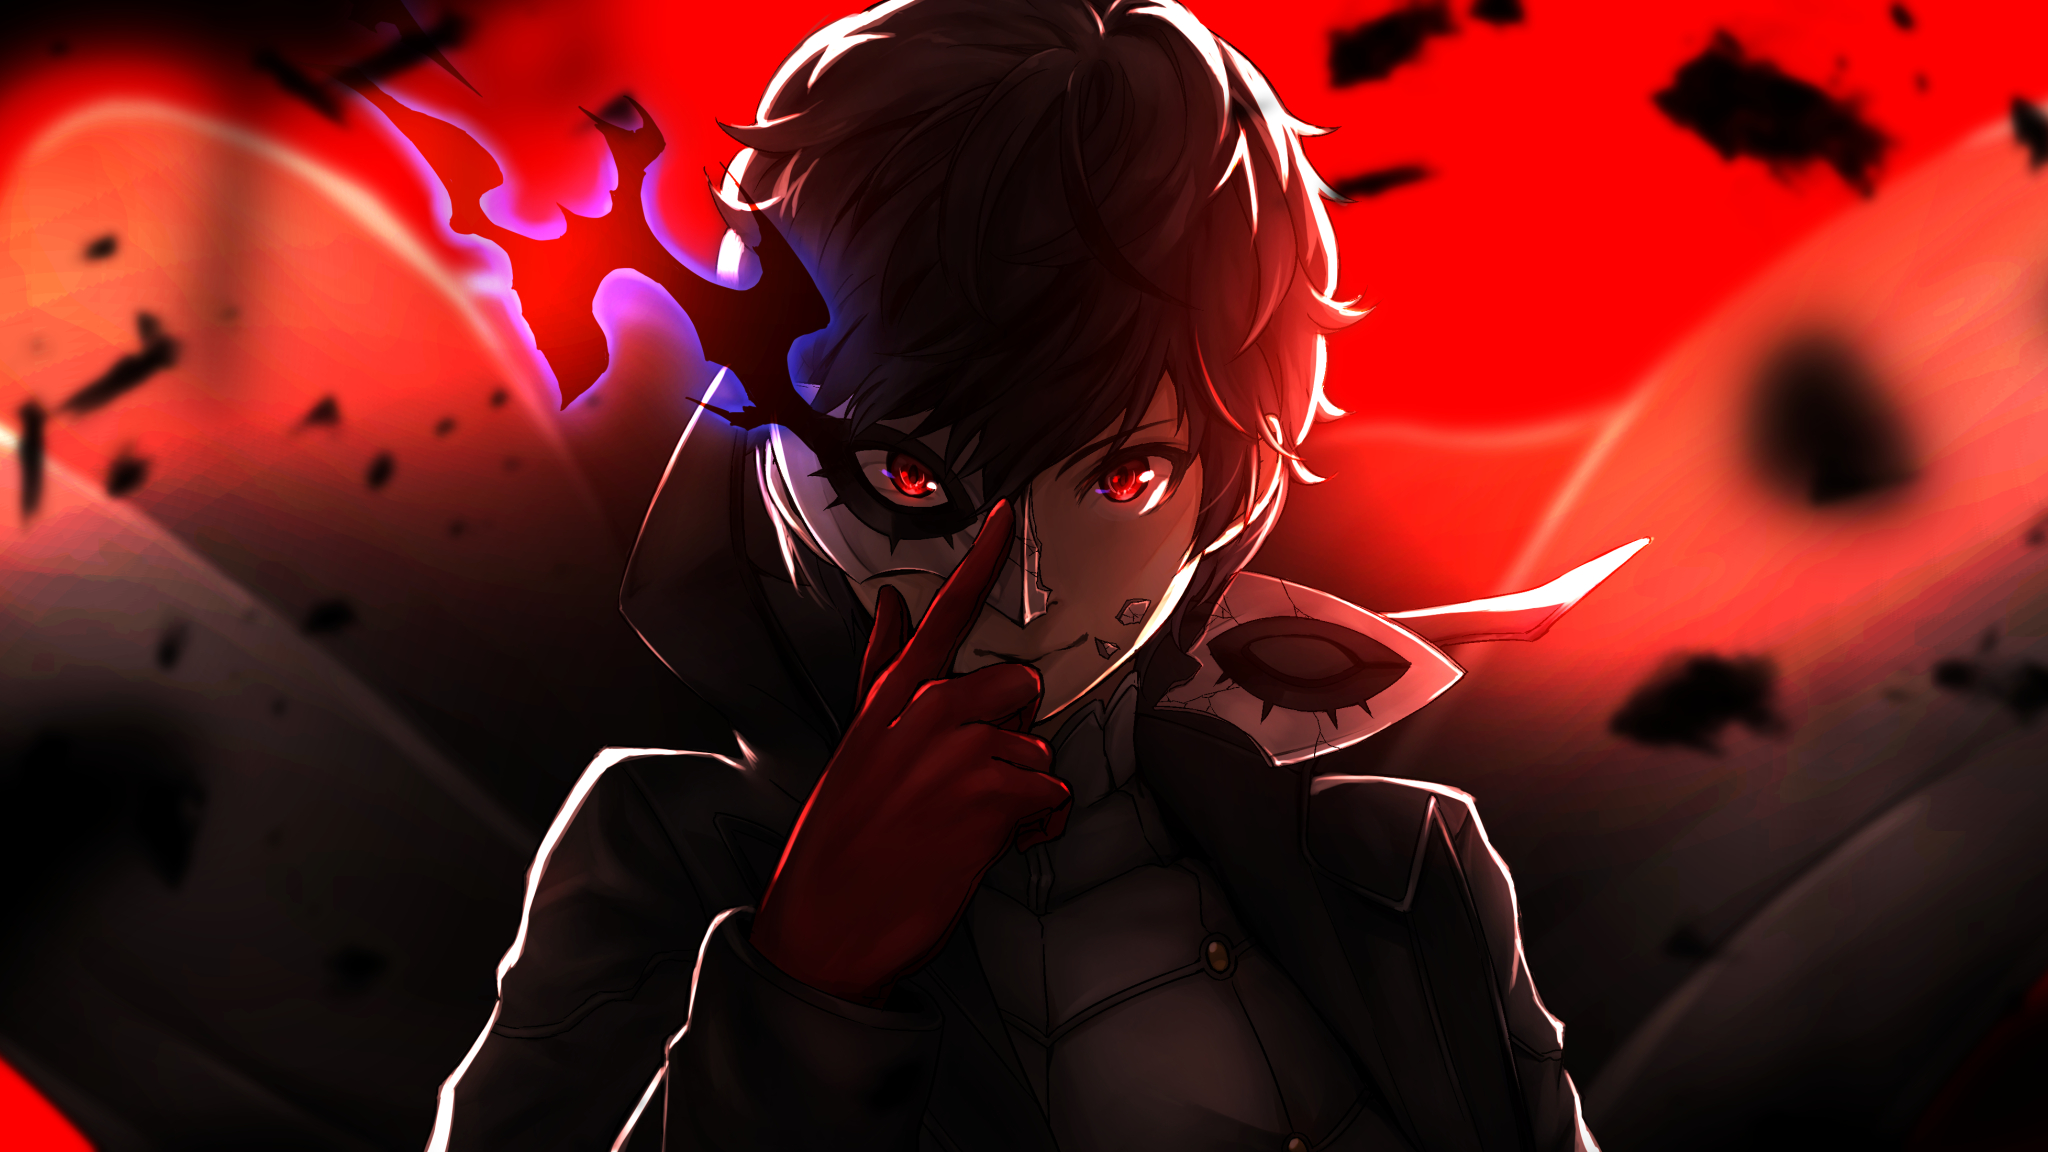 48x1152 Protagoinst Persona 5 48x1152 Resolution Wallpaper Hd Anime 4k Wallpapers Images Photos And Background